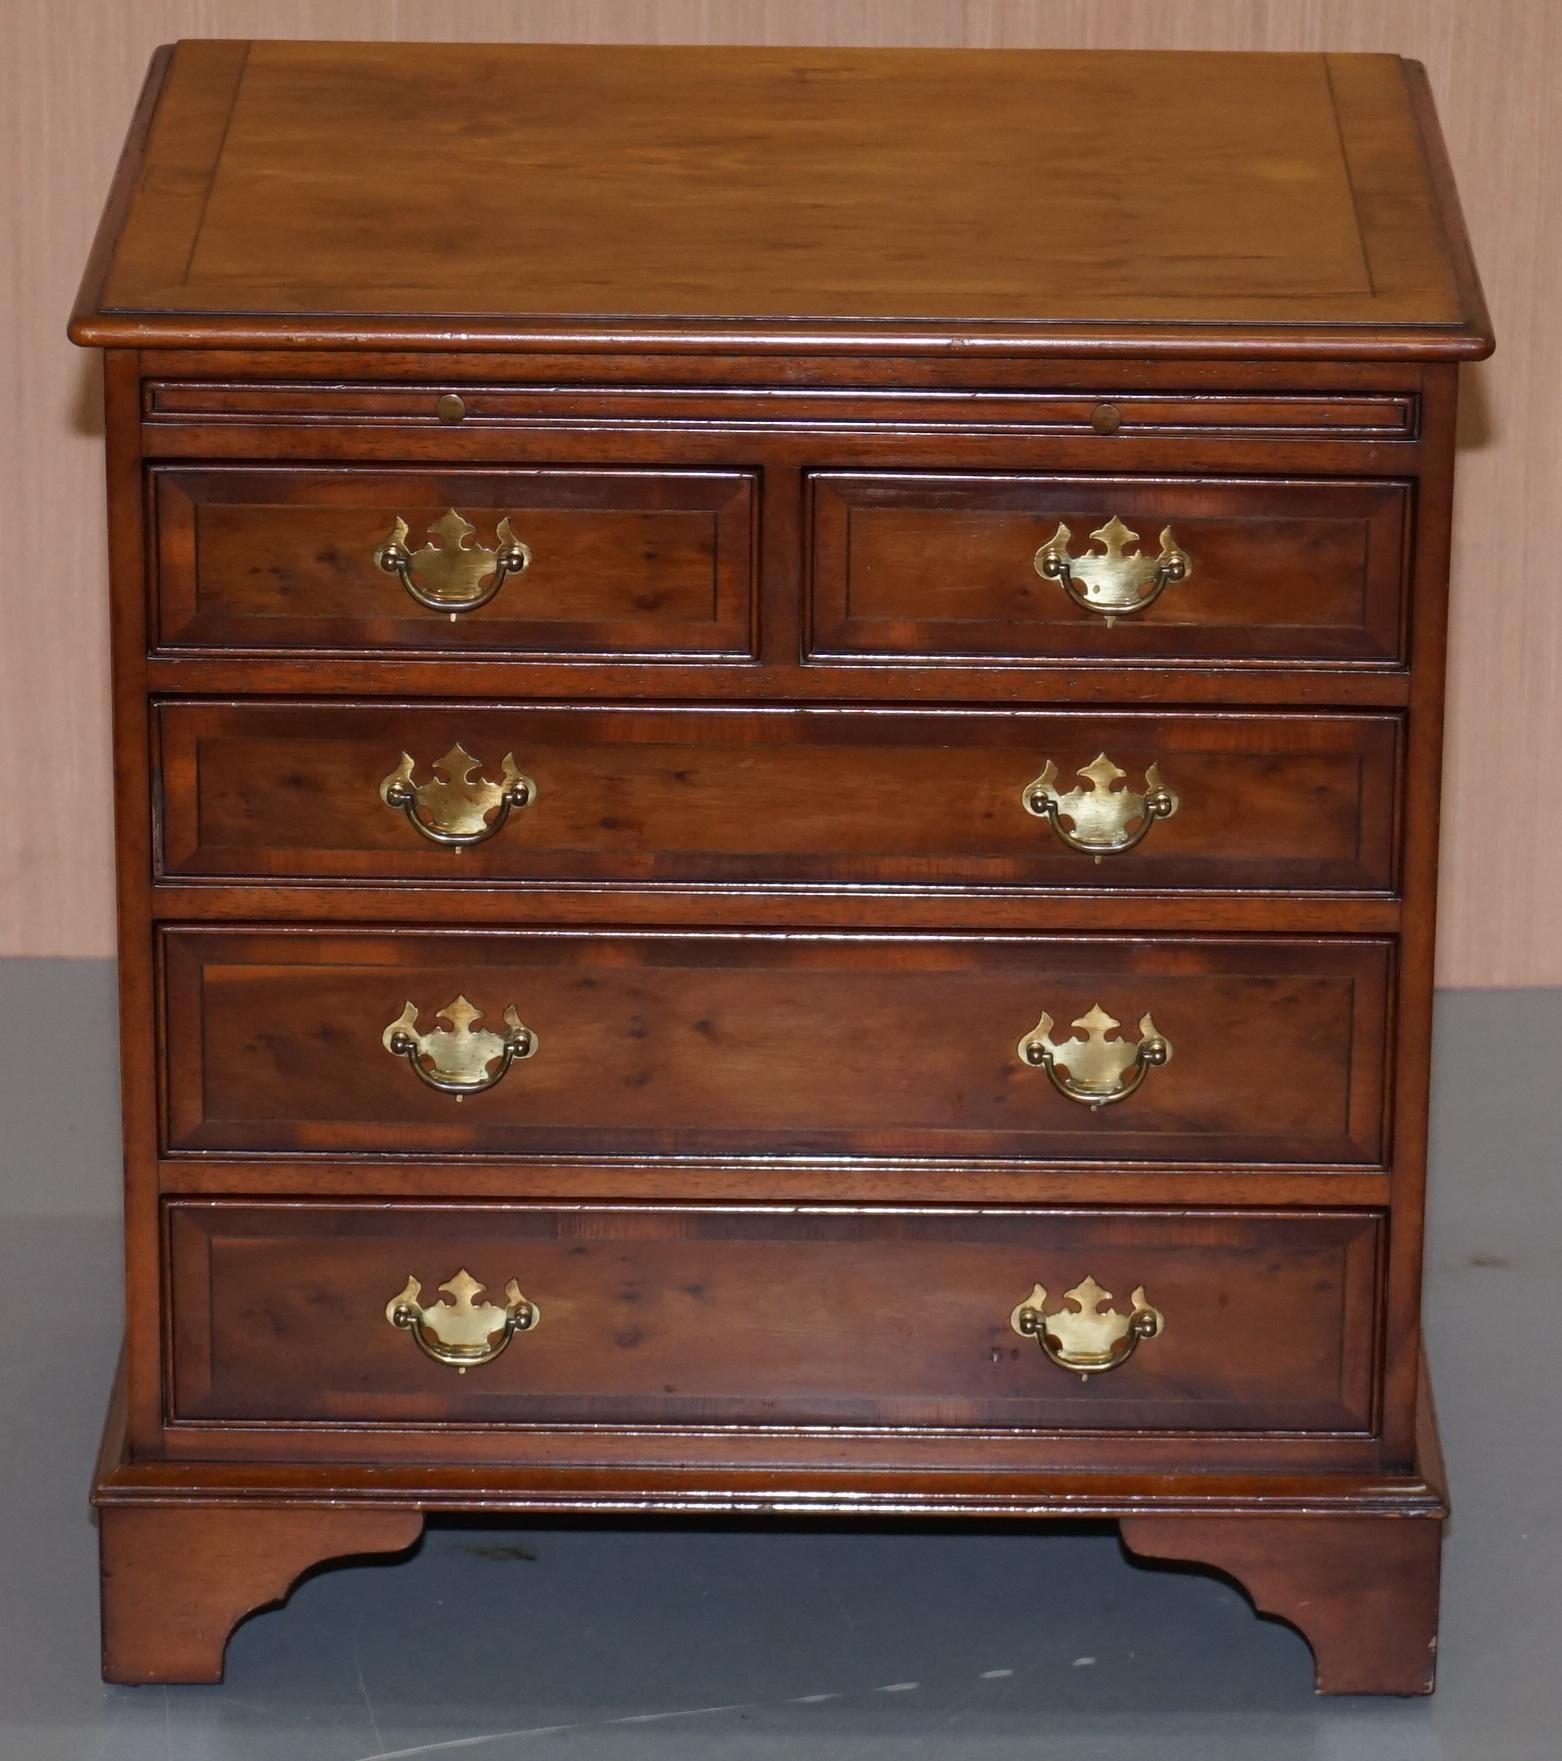 We are delighted to offer for sale this lovely vintage Burr Yew wood chest of drawers with green leather butlers serving tray

A good looking, functional and well made piece of furniture, the drawers all open and close as they should, the serving